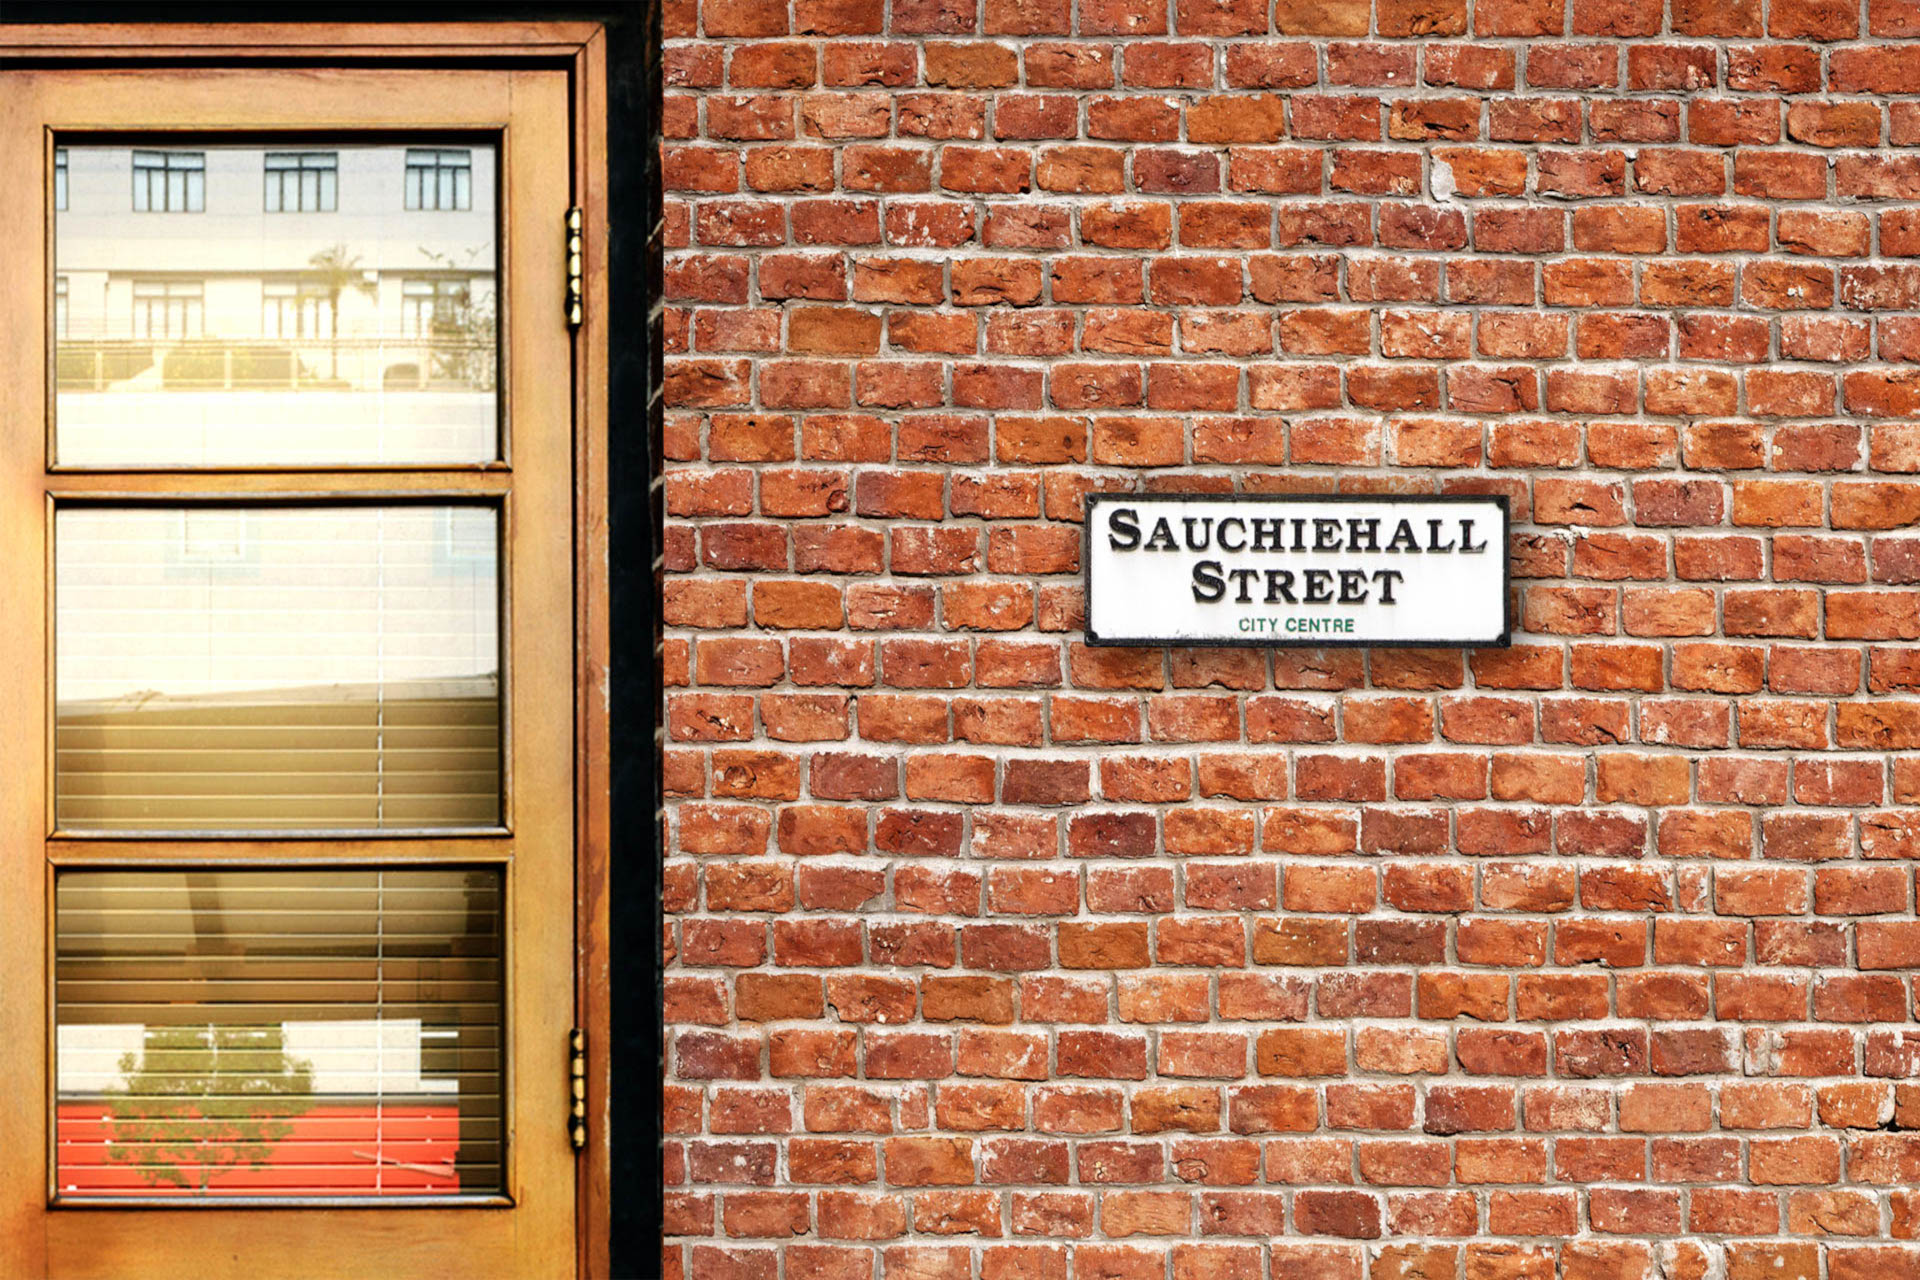 Sauchiehall-street-sign.-One-of-the-most-famous-streets-in-Glasgow-Scotland